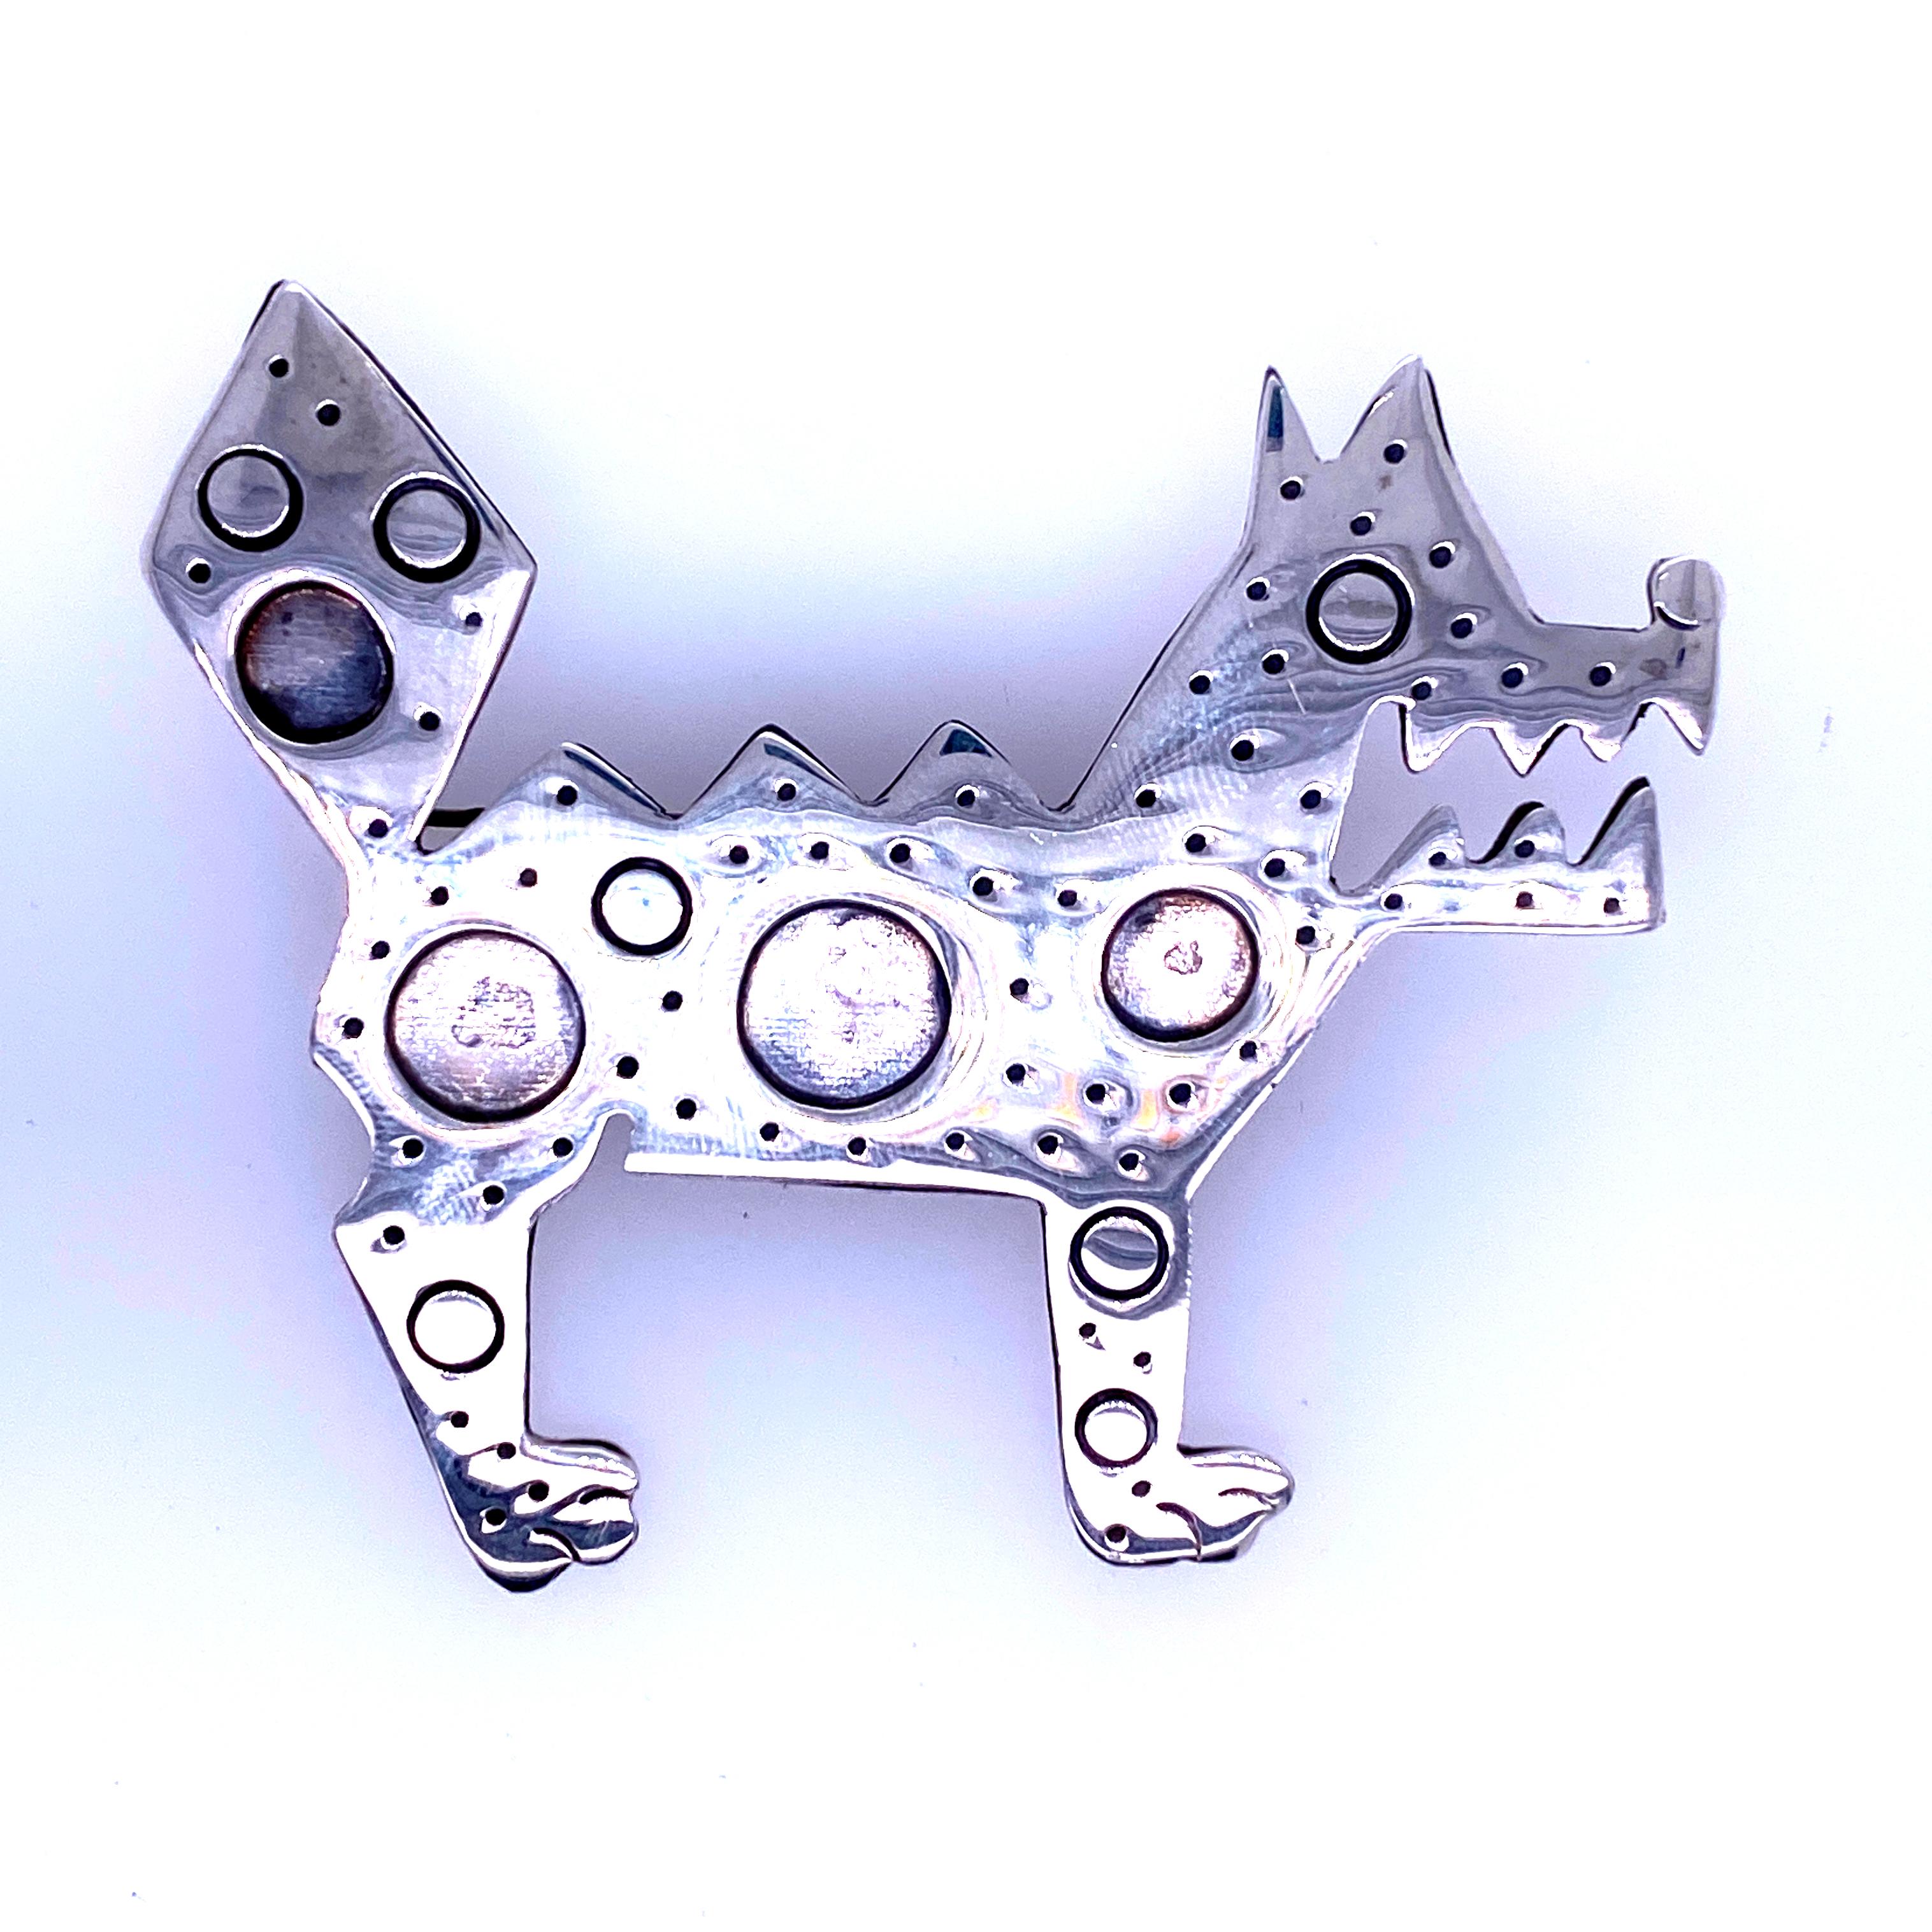 One sterling silver Mexican dog pin (stamped STERLING TR-94) measuring 2.5 inches long x 2.25 inches tall.  Circa 1970s. 